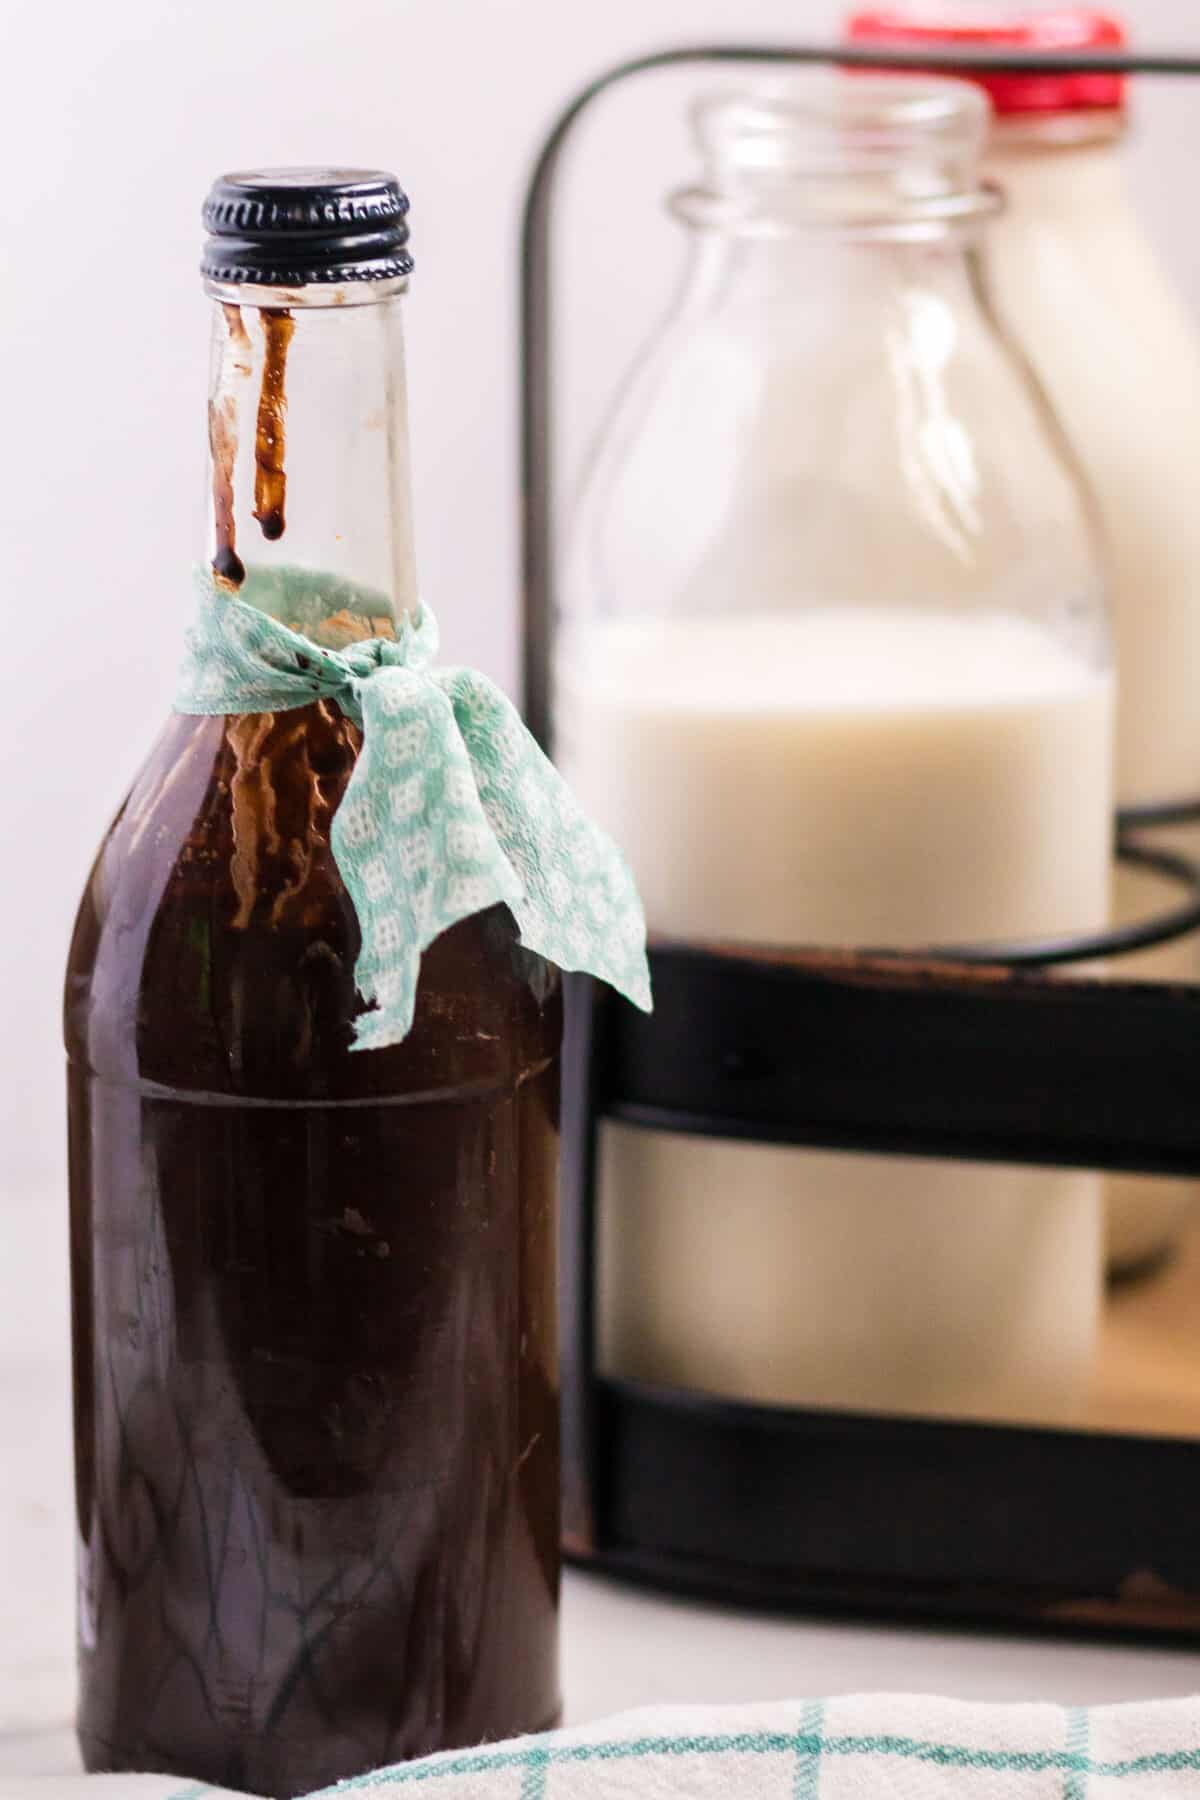 chocolate syrup in a bottle